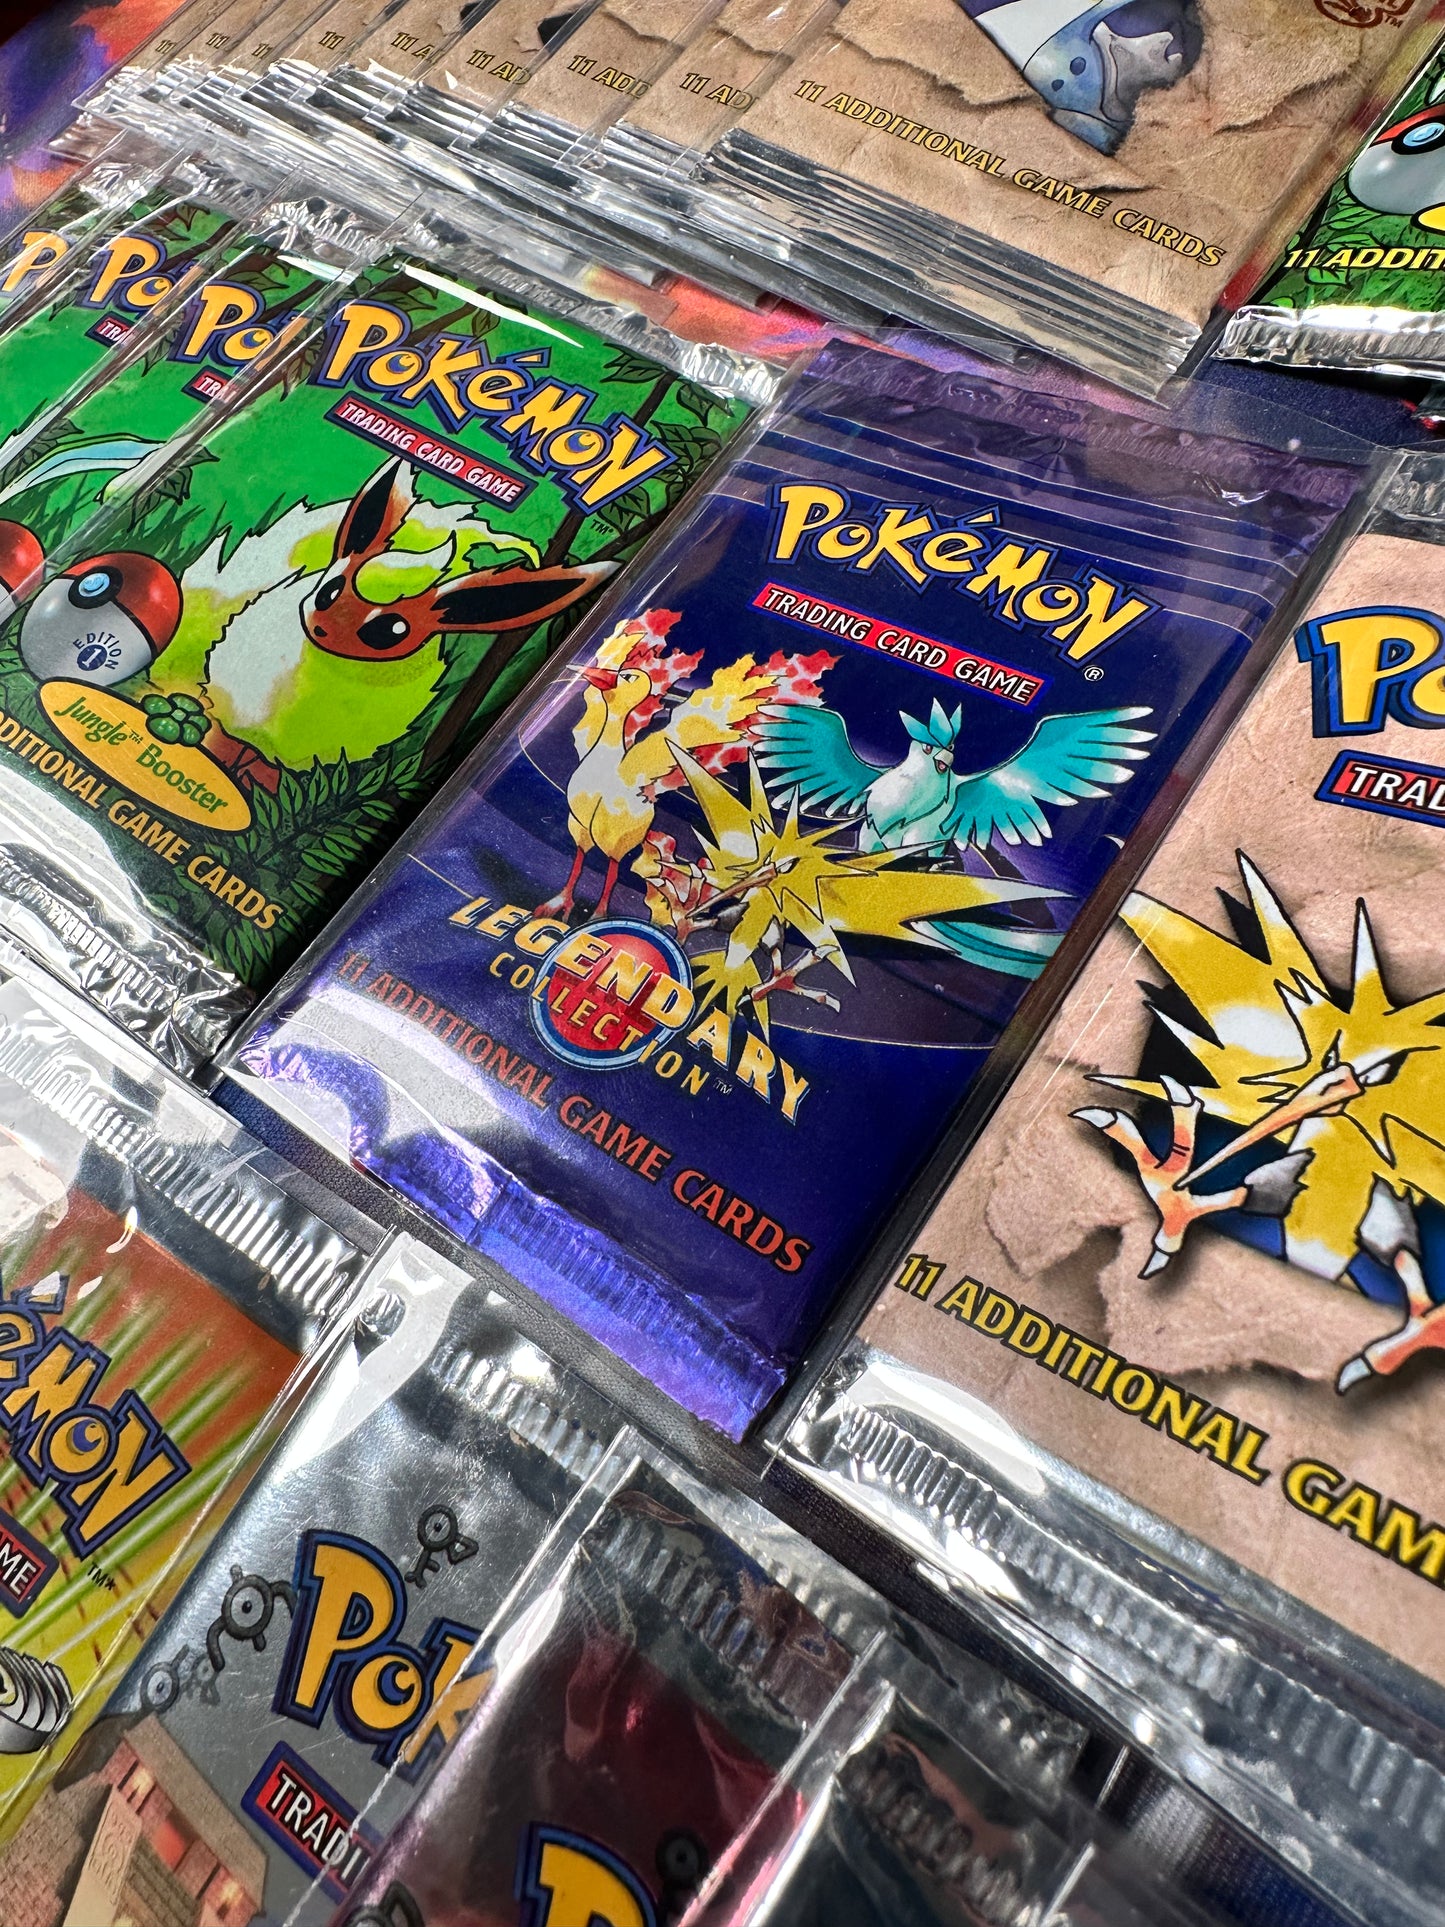 Mystery Box - Guaranteed WoTC Booster Pack in every box!! - Round 2 - DM on Instagram @VintageVaultPokemon for discounts!